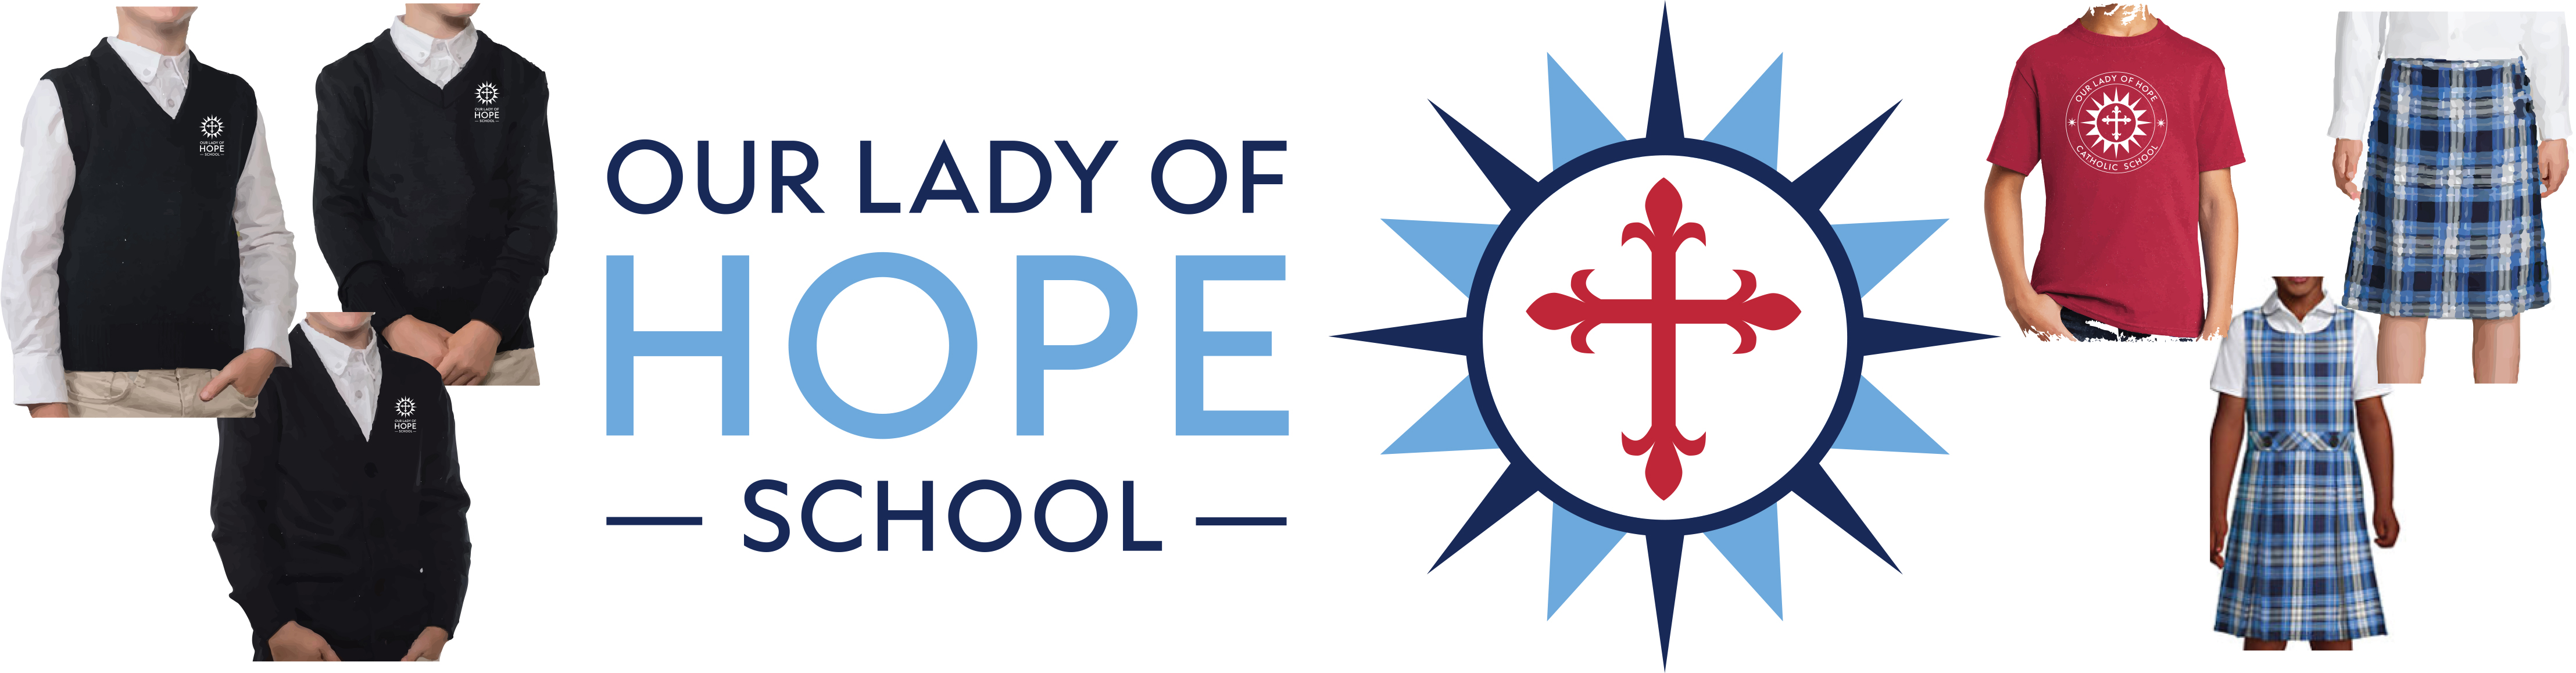 Our Lady of Hope School's Logo